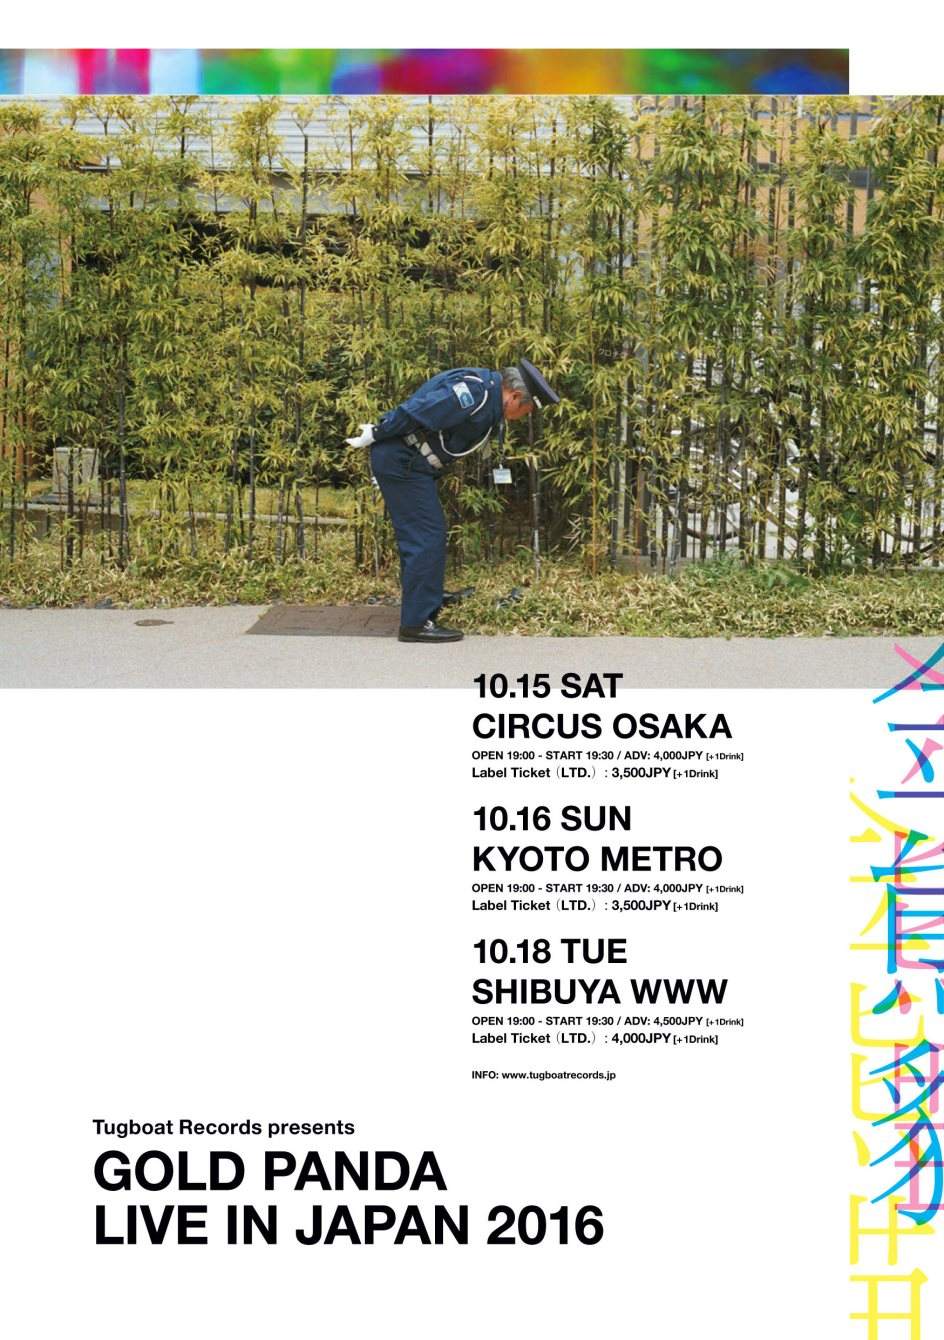 Tugboat  Records presents Gold Panda Live in Japan 2016 - フライヤー表